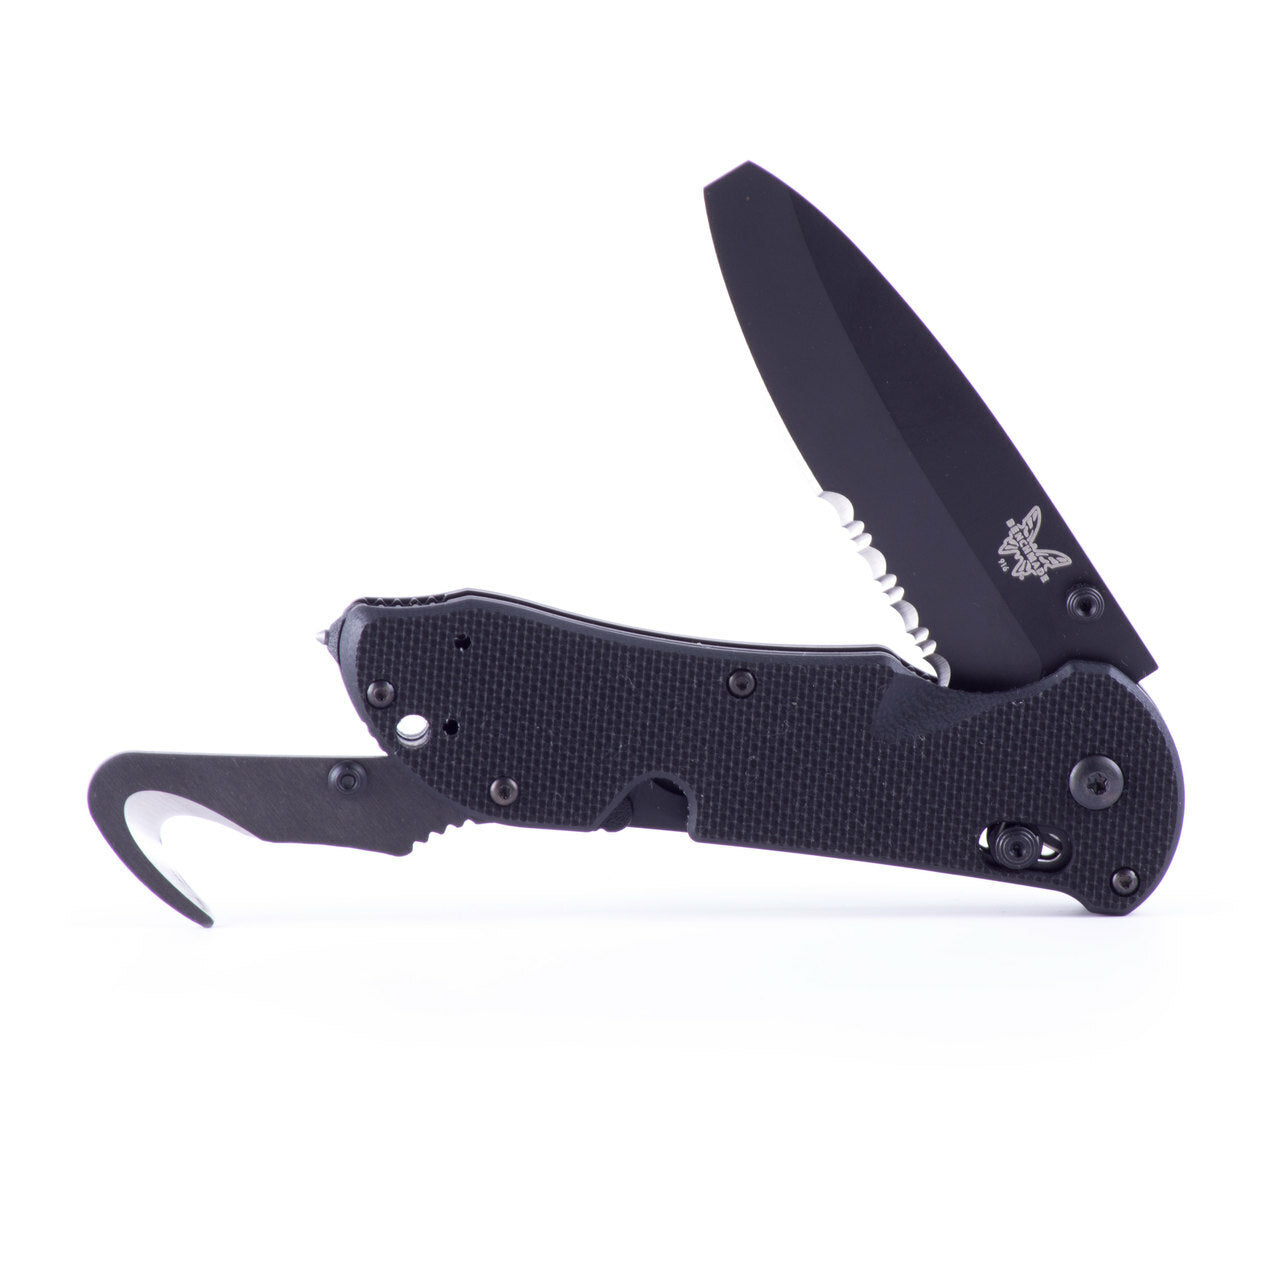 Benchmade Tactical Triage Serrated Opposing Bevel